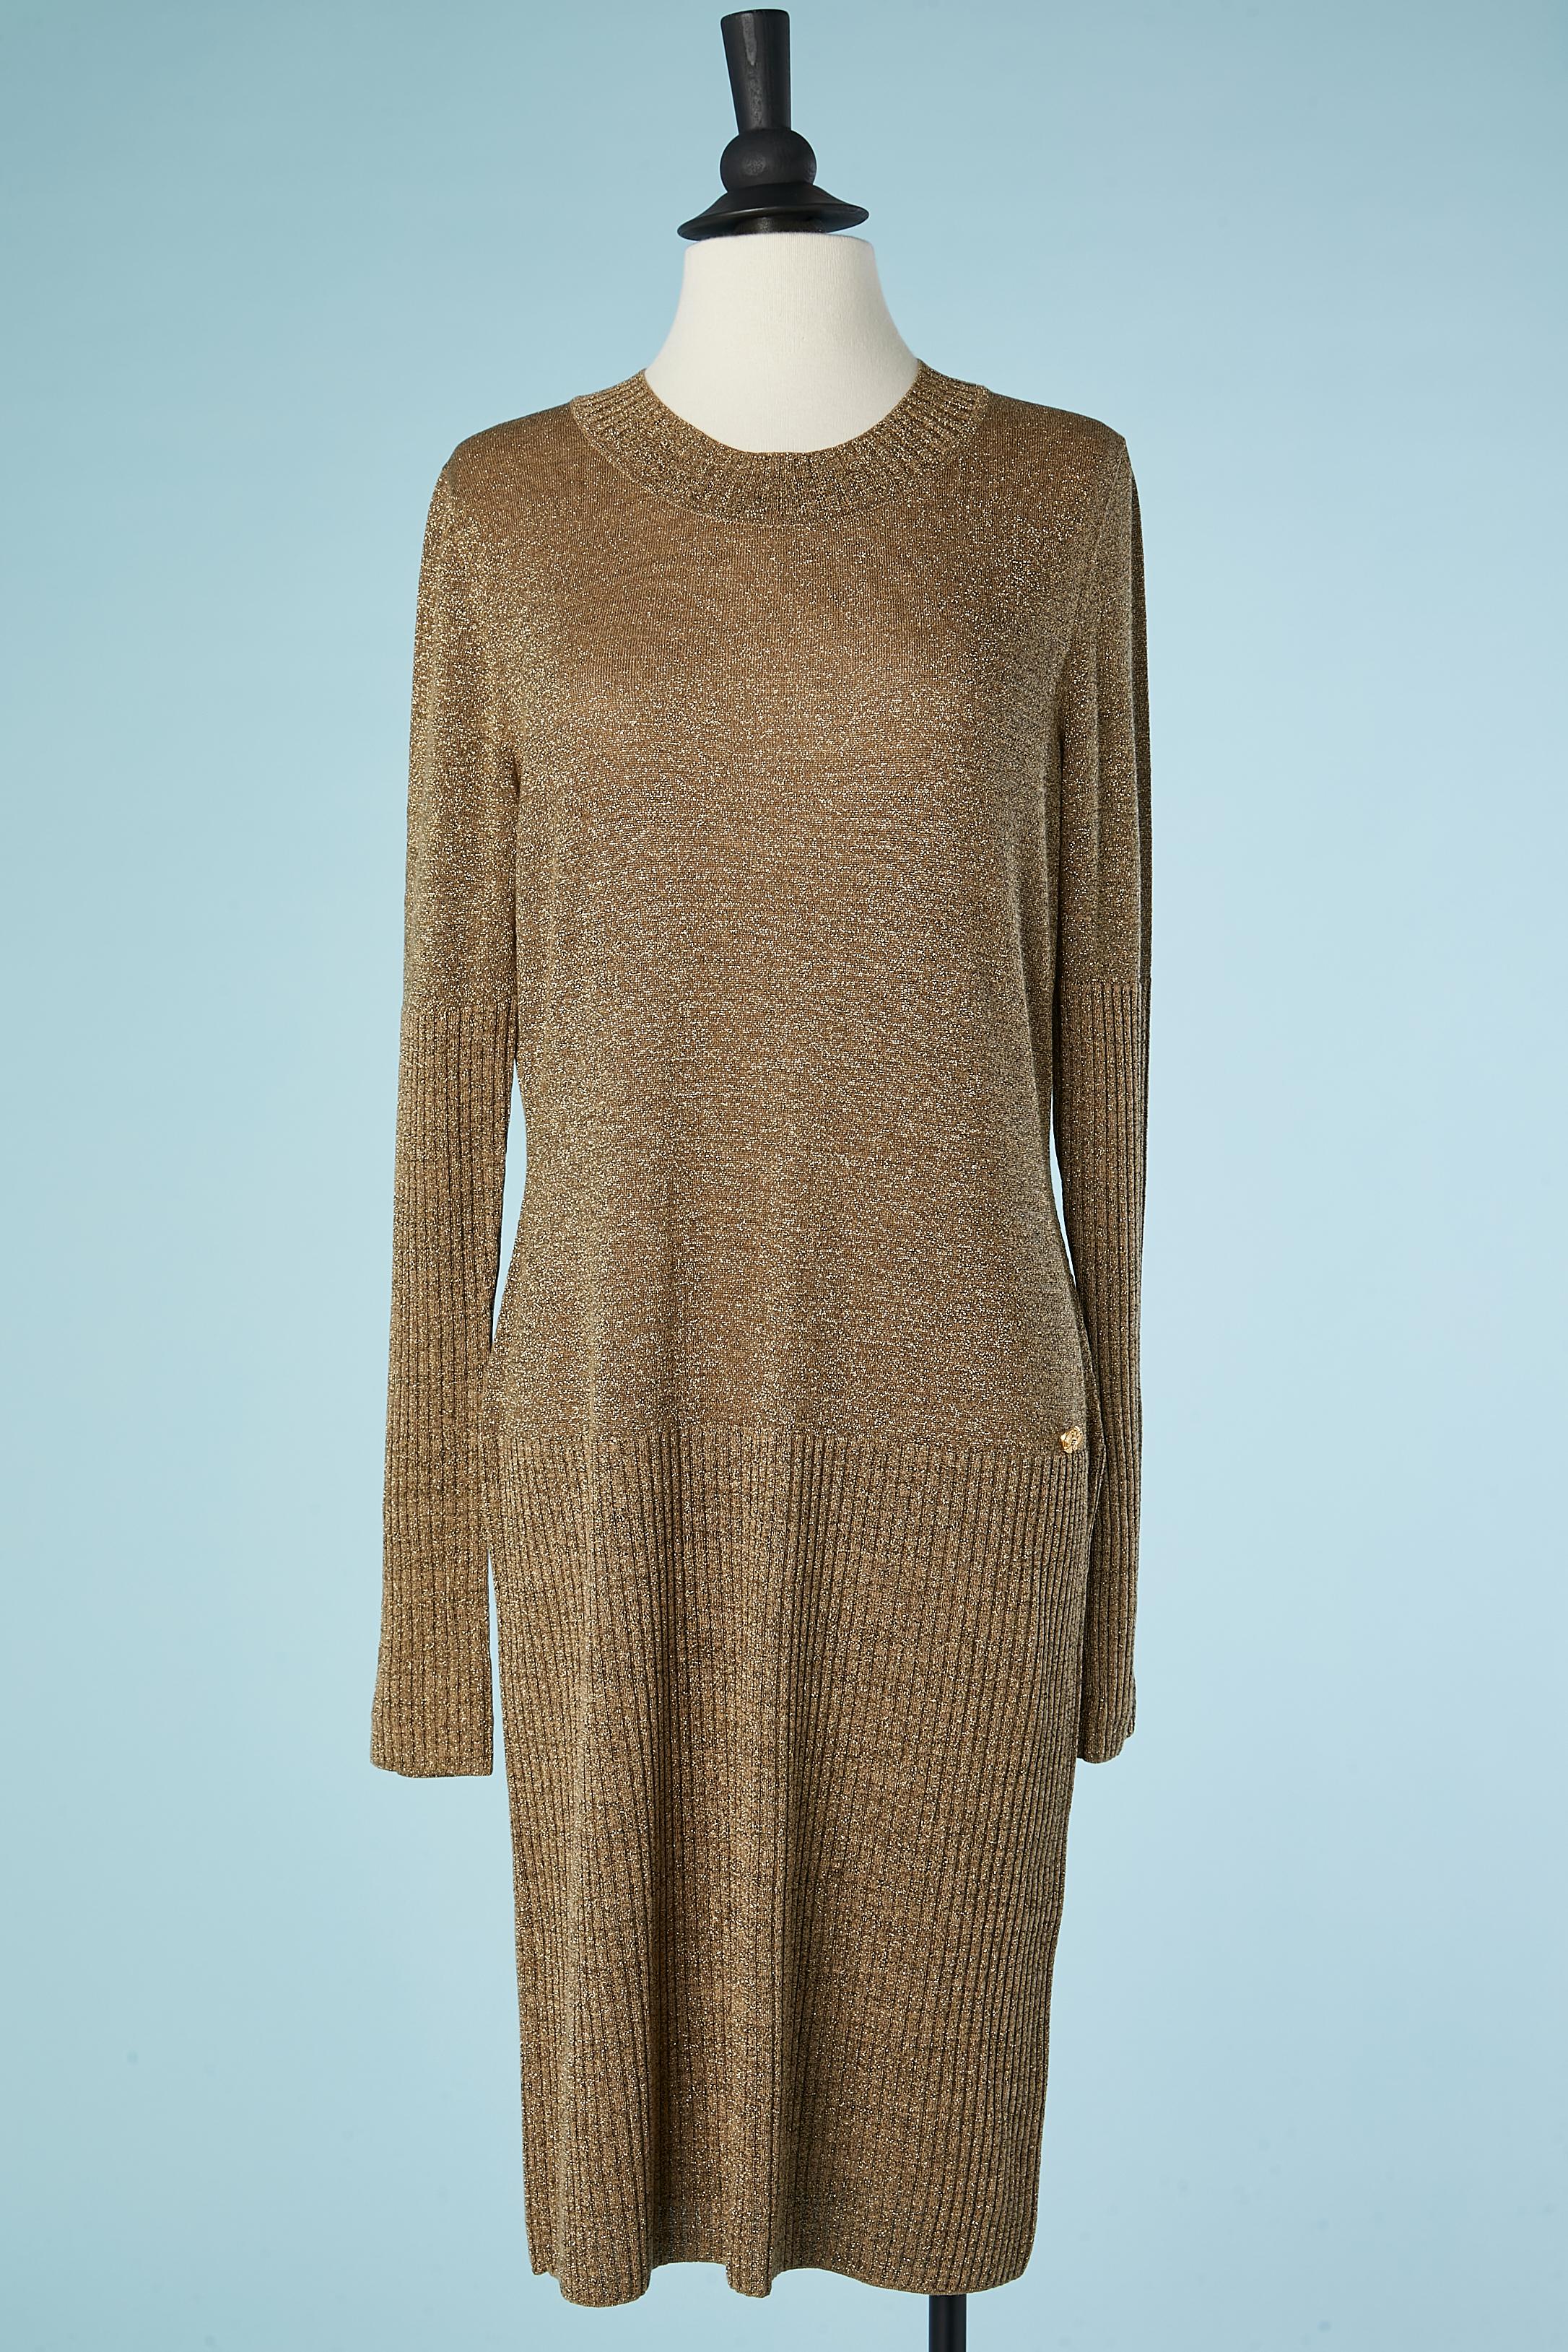 Gold lurex knit cocktail dress . Knit composition: 55% wool, 32% rayon, 13% polyester + lurex
Small 